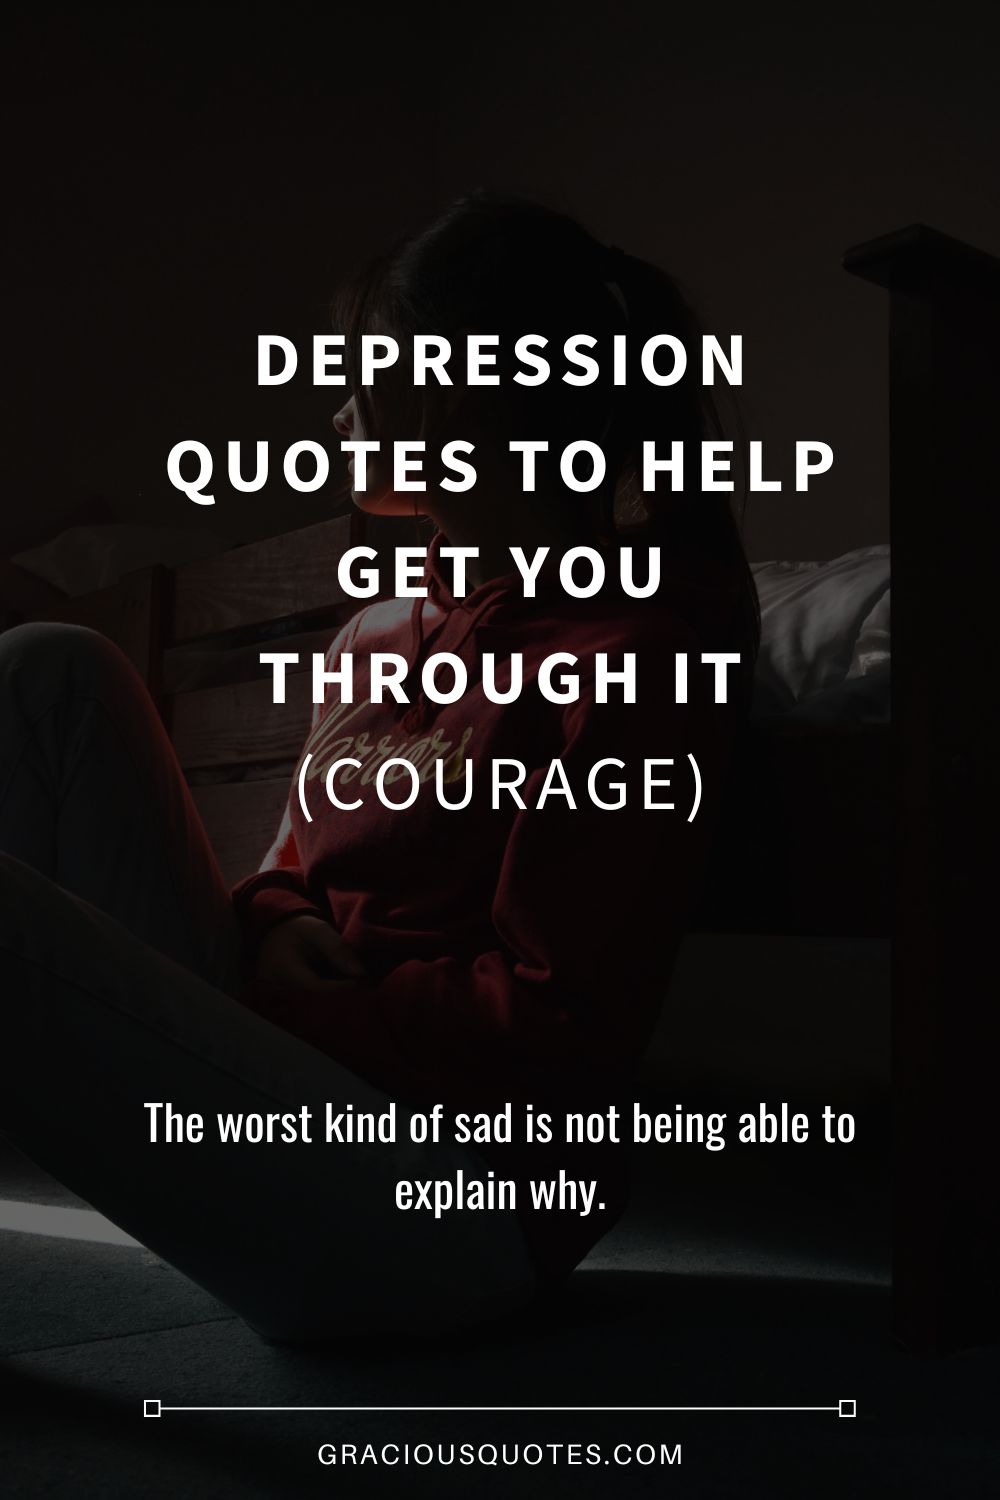 53 Depression Quotes to Help Get You Through It (COURAGE) - Gracious Quotes